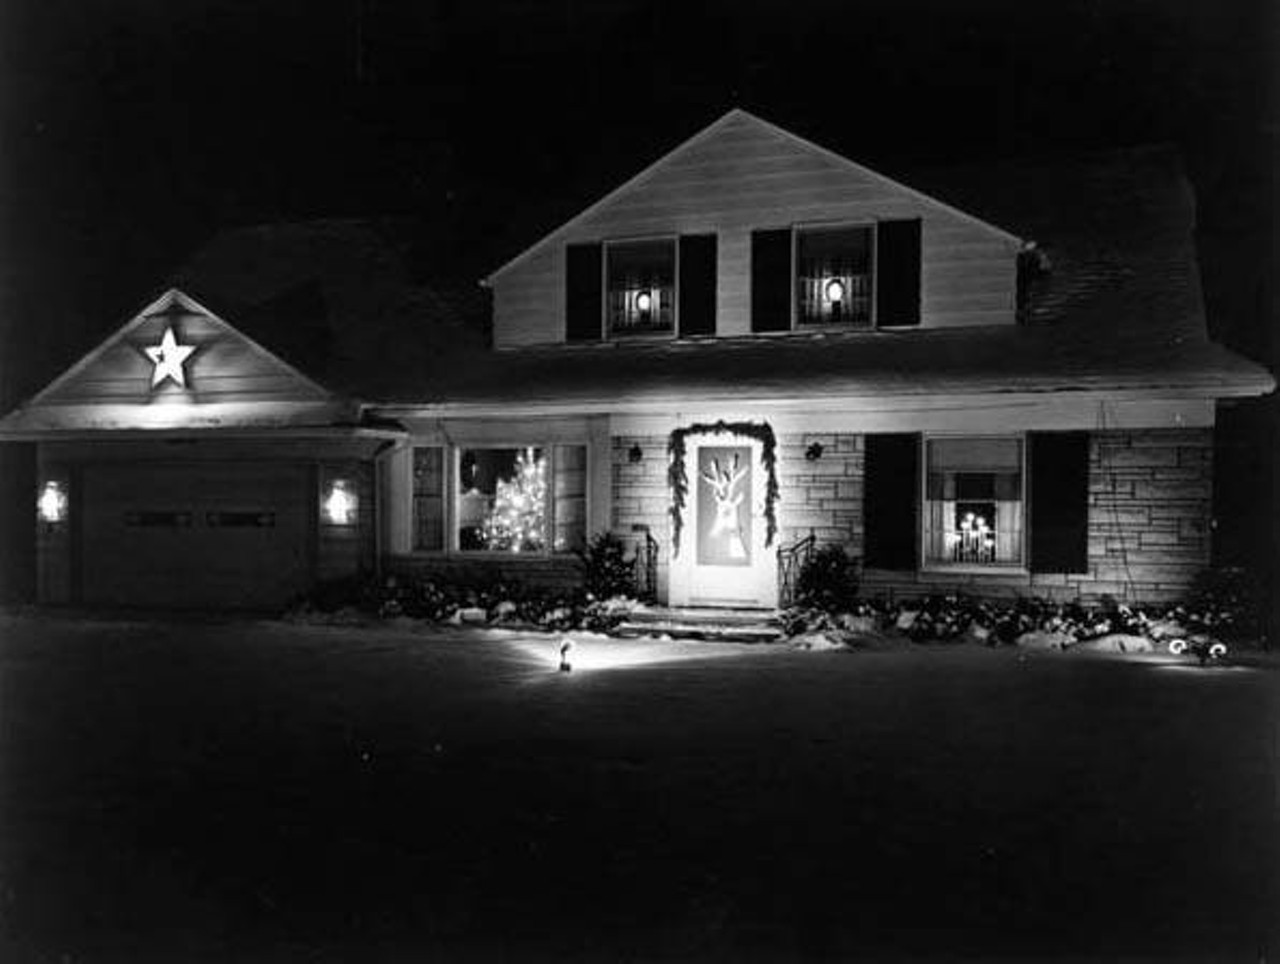 Nearby house at Nela Park decorated for Christmas, 1957.